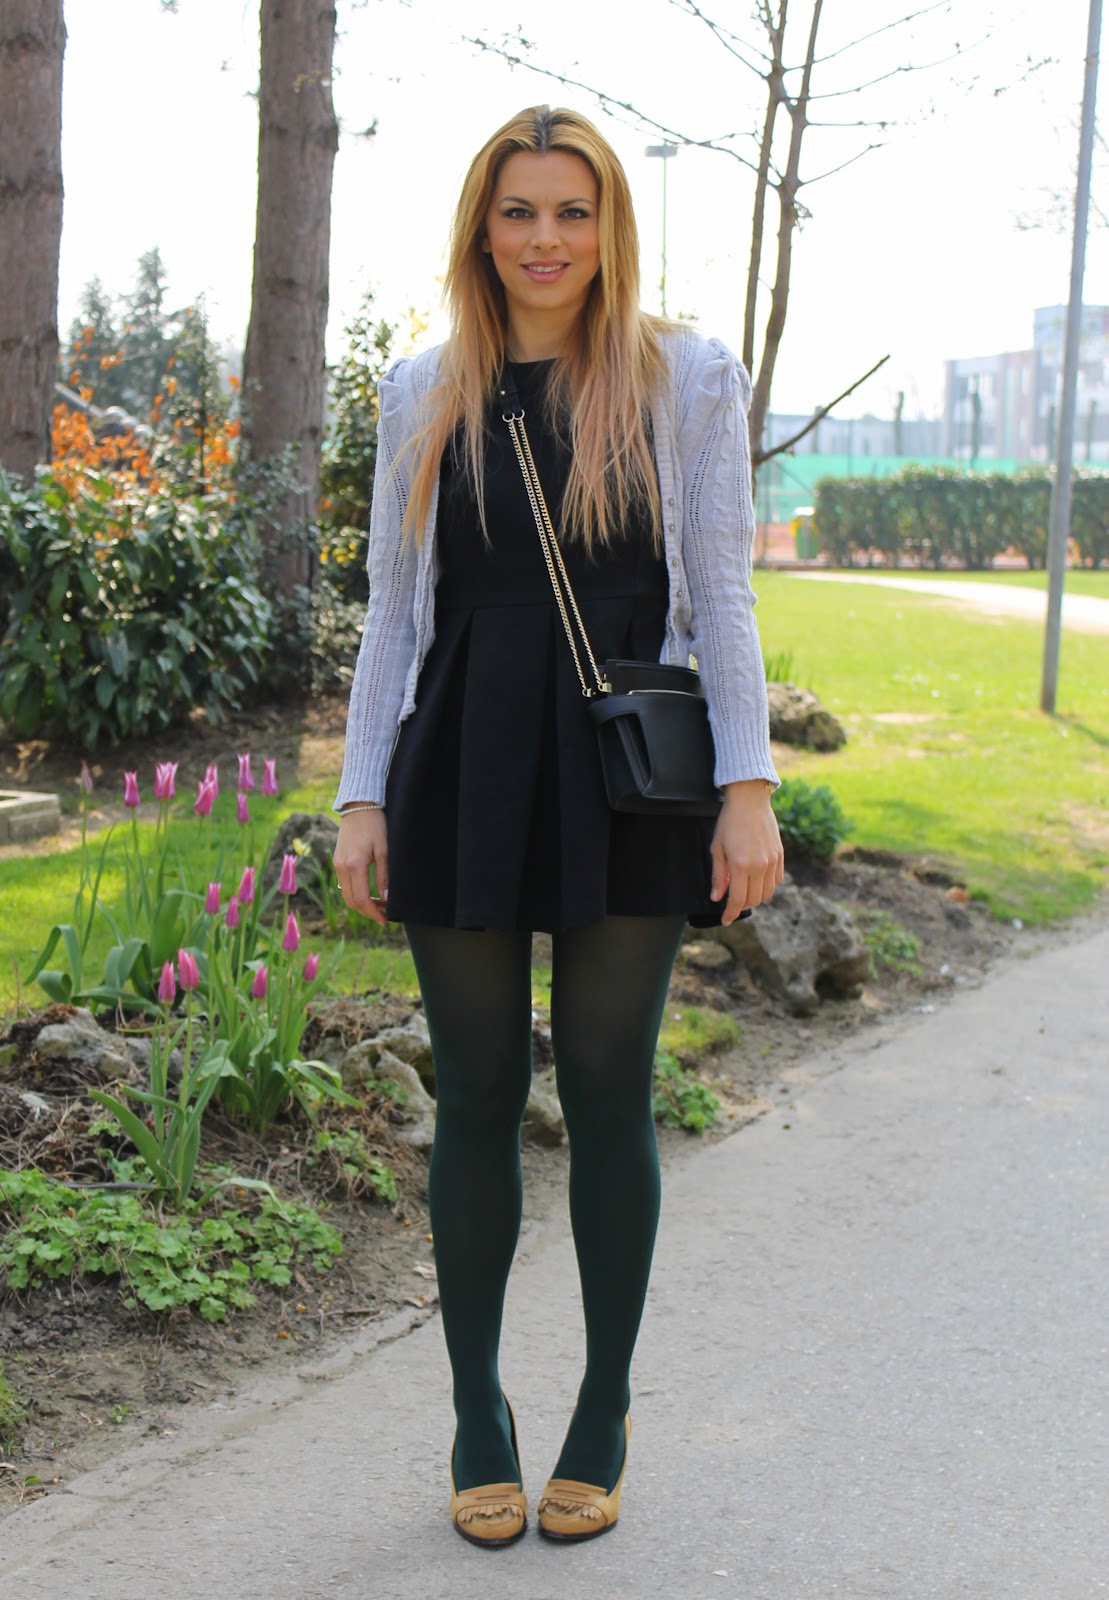 The Ultimate Green Tights Guide Fashionmylegs The Tights And Hosiery Blog